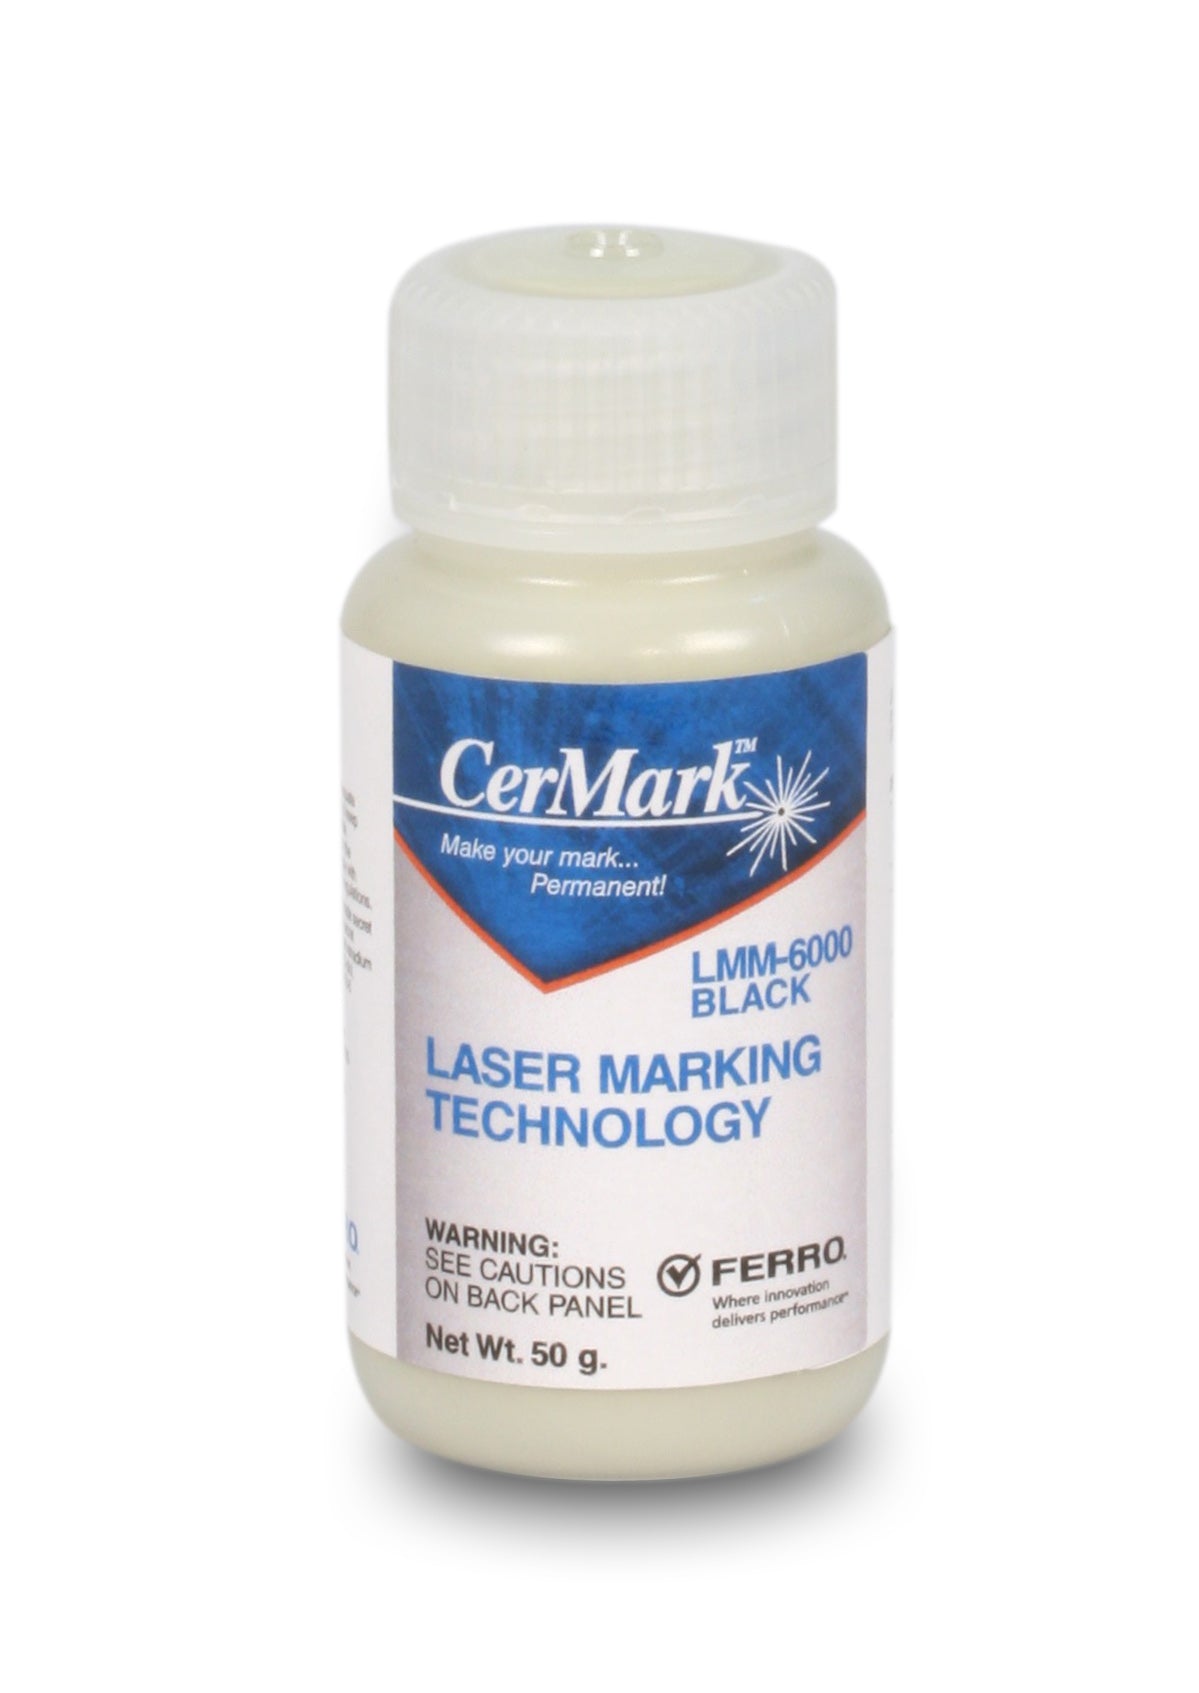 Laser marking with CerMark / markSolid for CO2 lasers